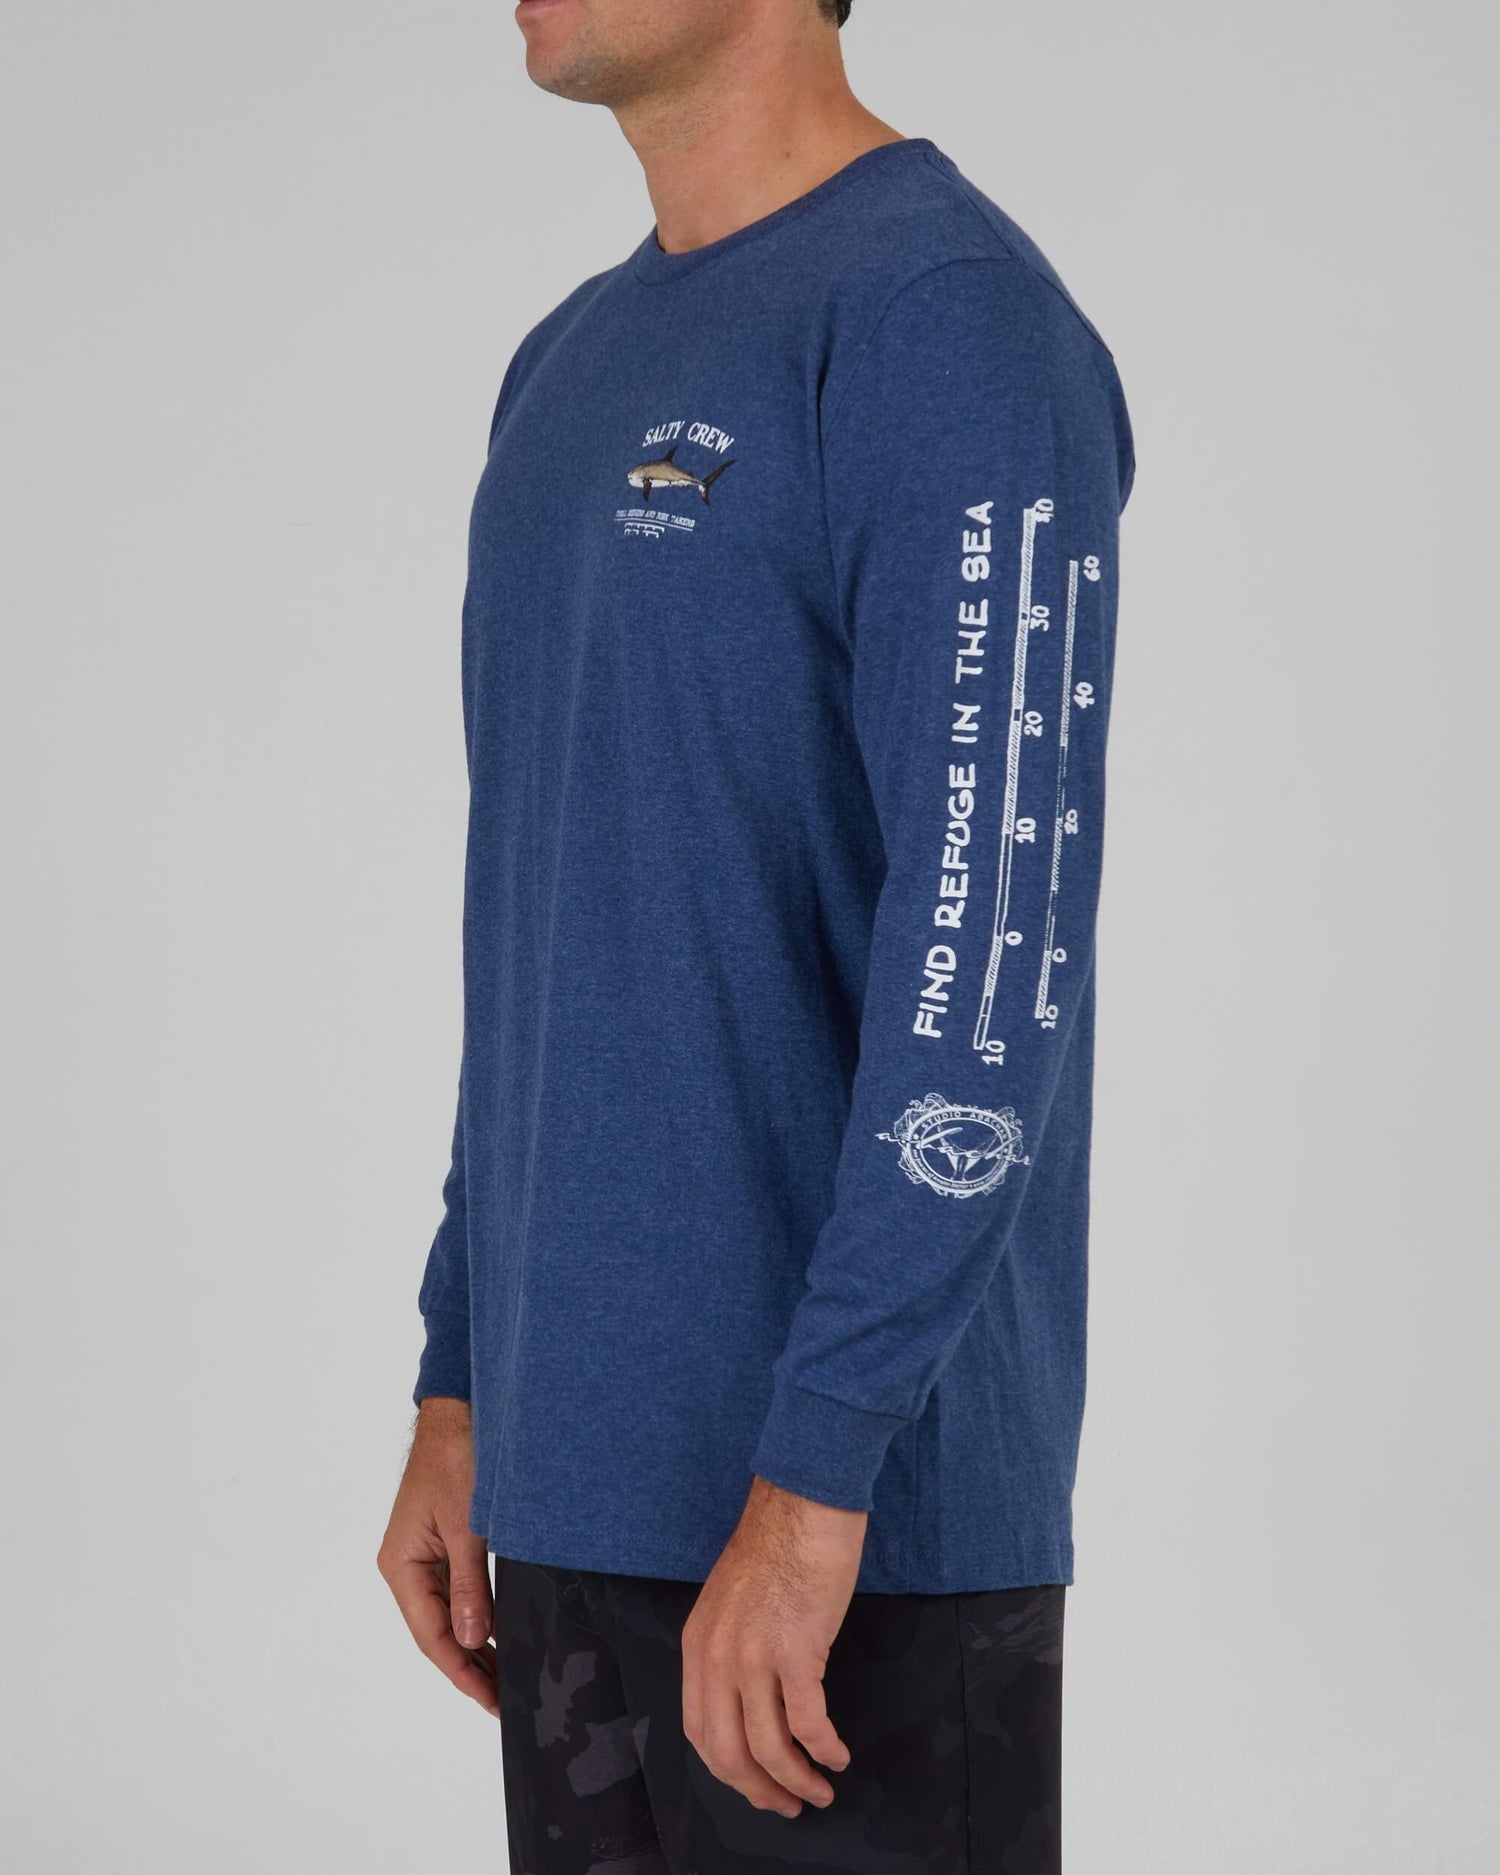 Salty crew T-SHIRTS L/S Bruce L/S Tee - Navy Heather in Navy Heather